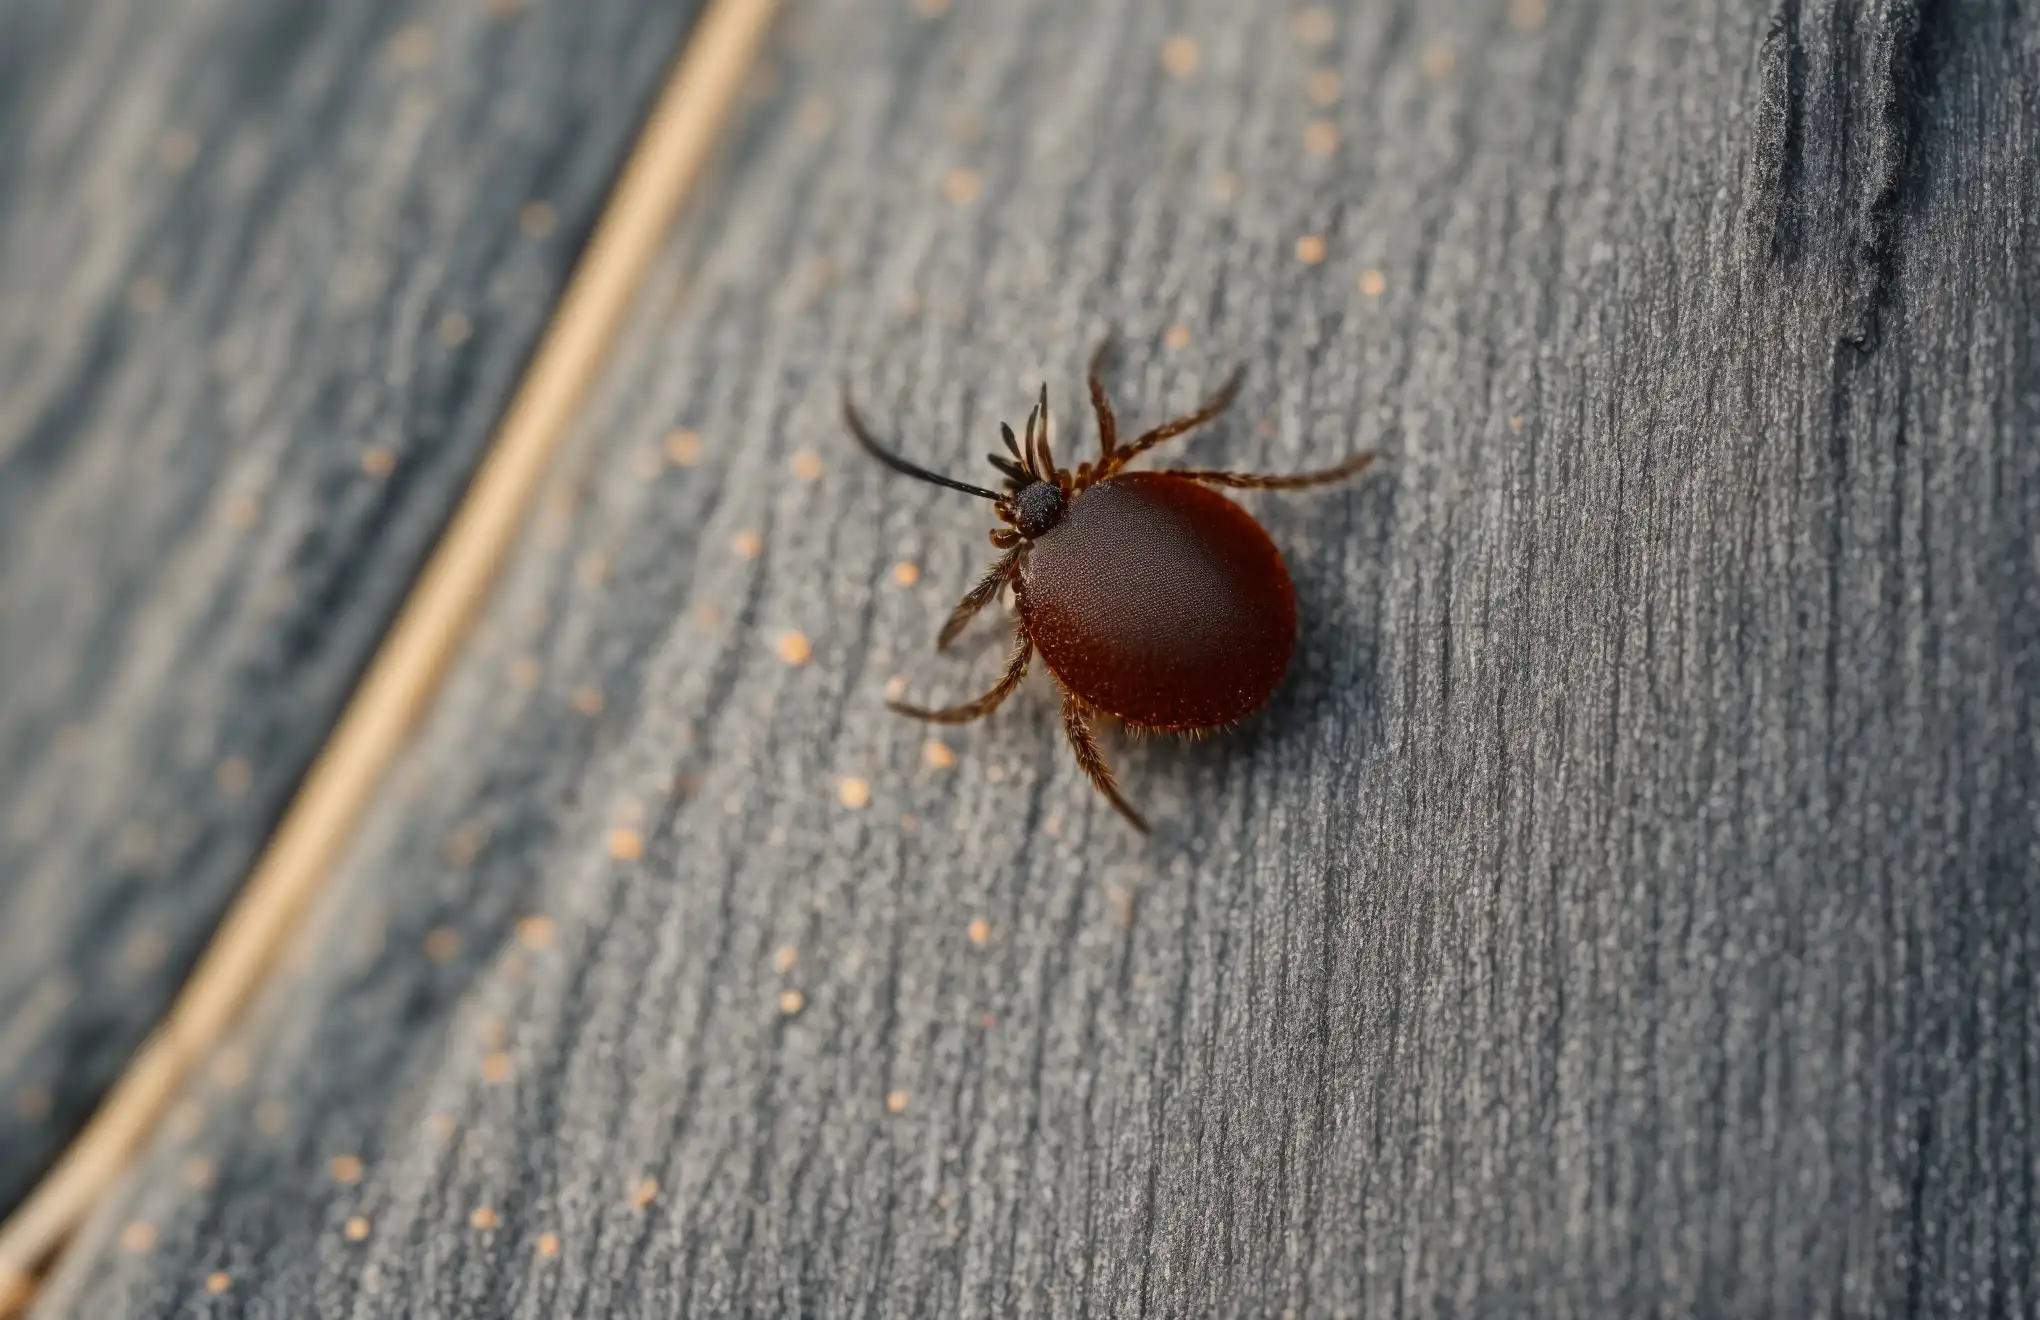 How to Avoid Ticks While Camping